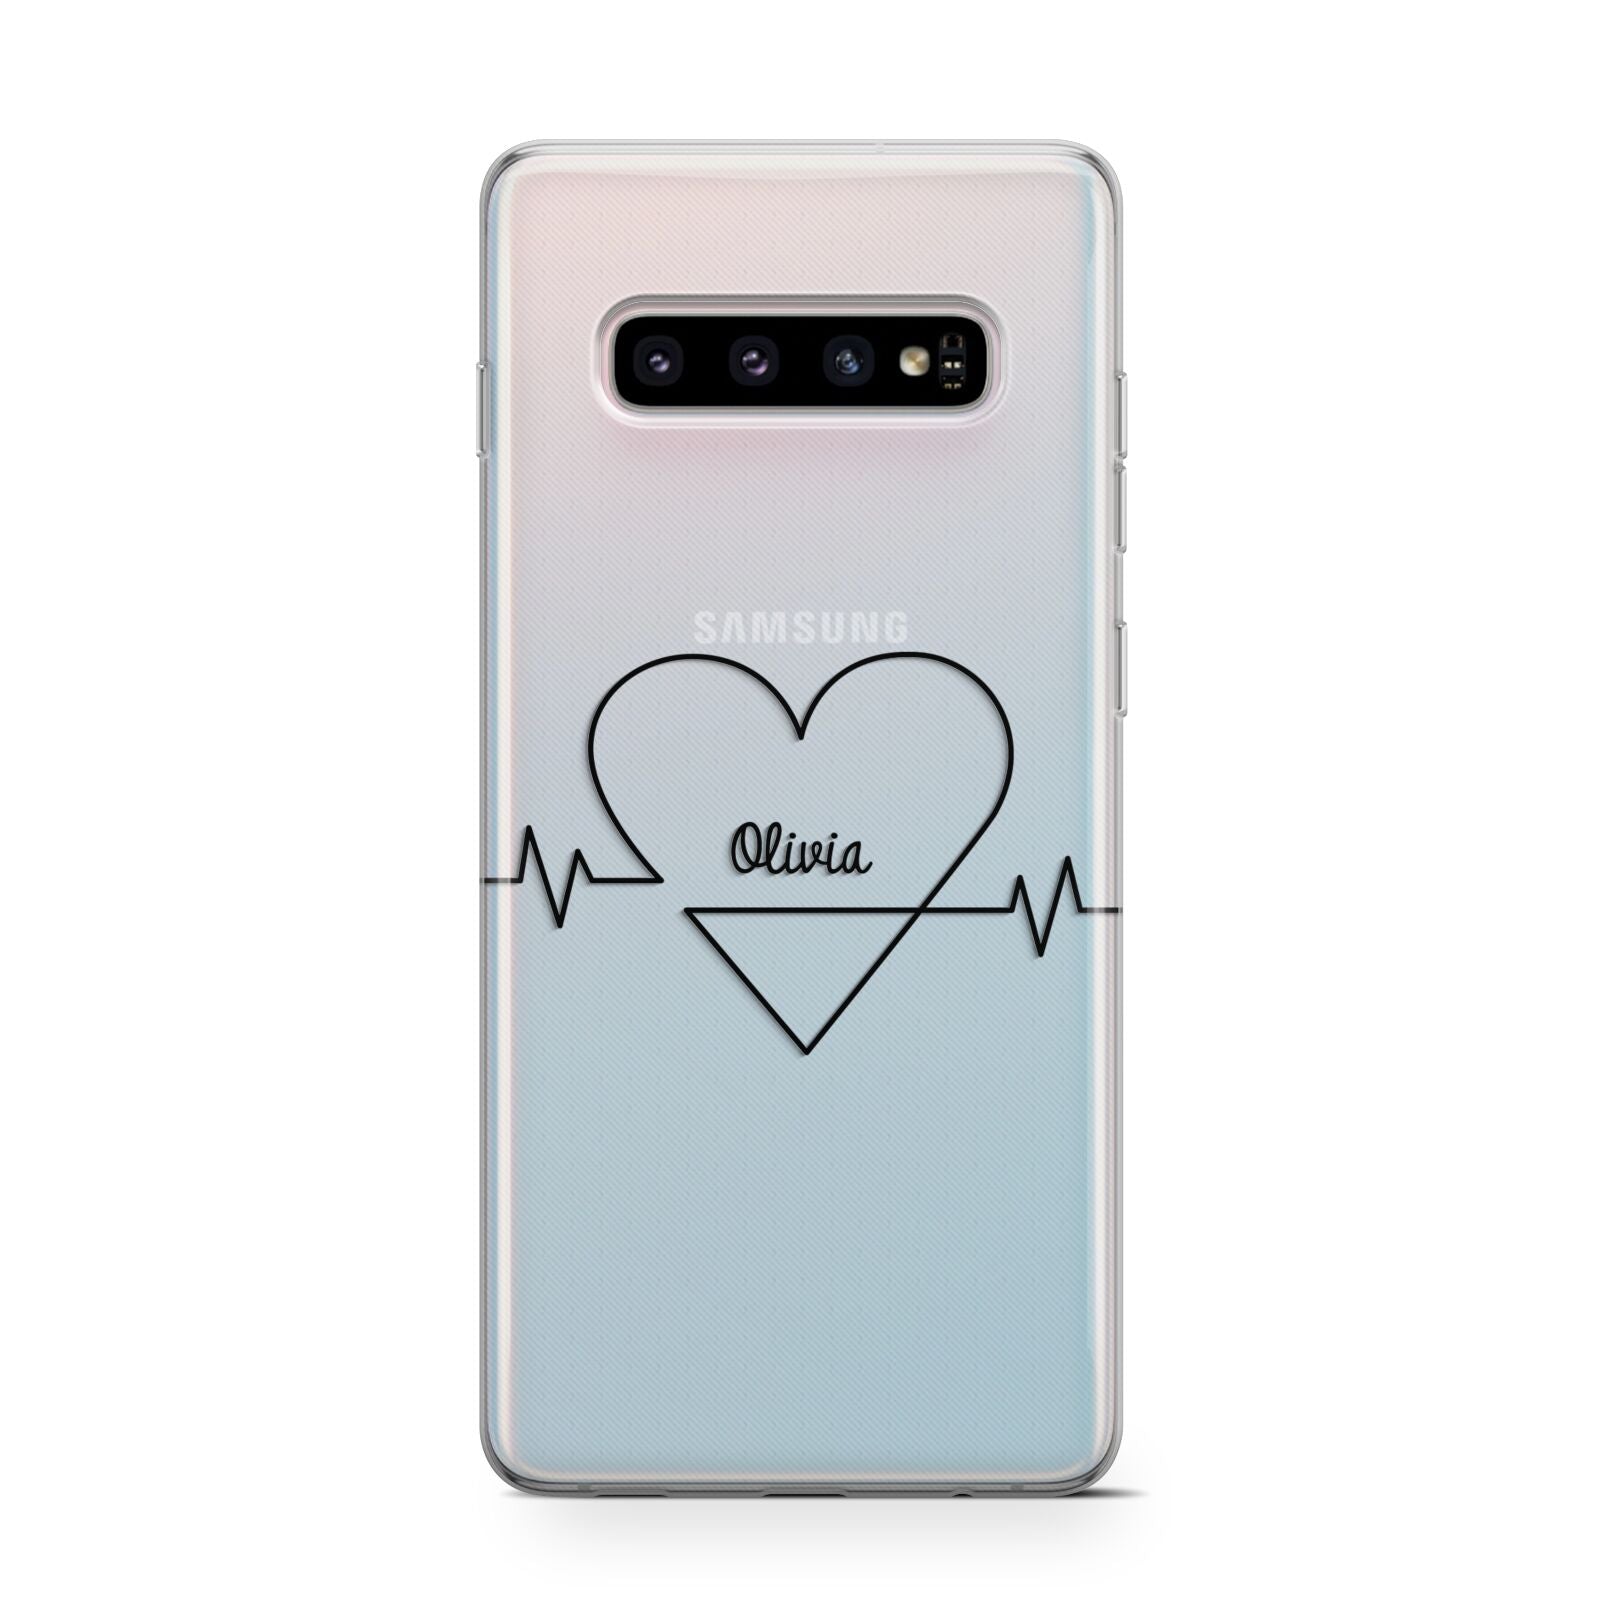 ECG Effect Heart Beats with Name Samsung Galaxy S10 Case